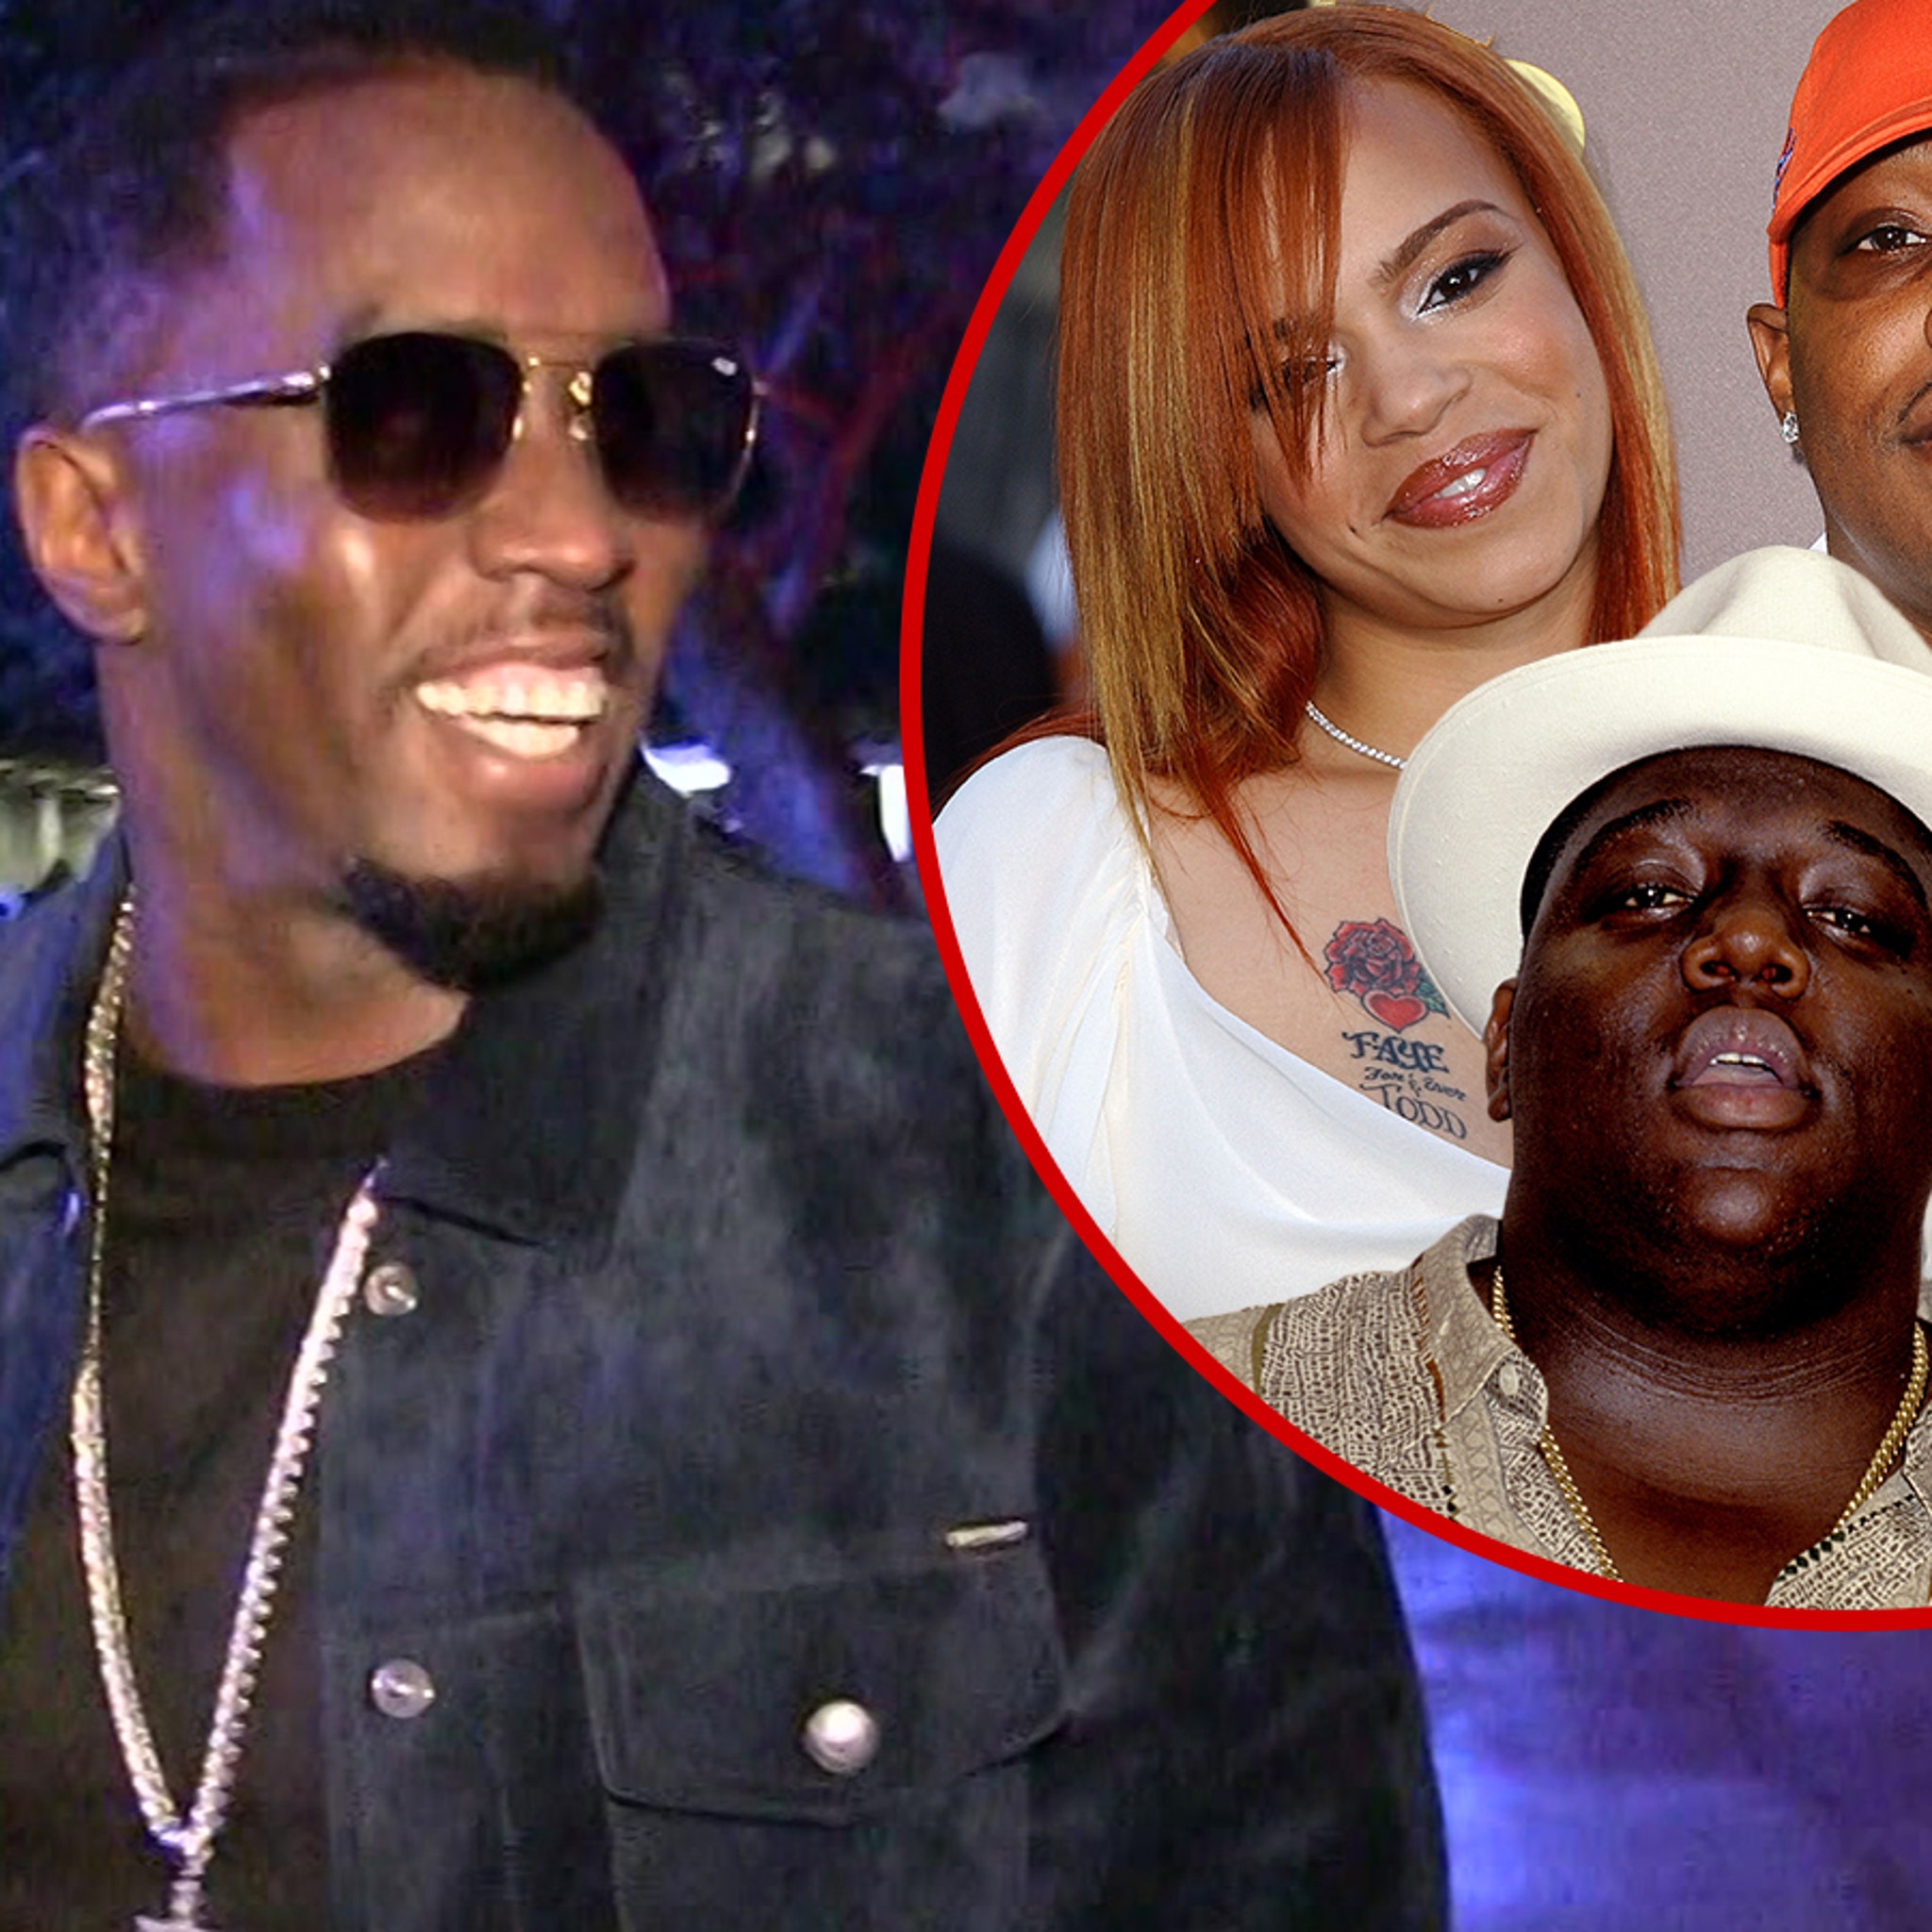 Diddy Hands Publishing Rights Back To Bad Boy Artists Faith Evans